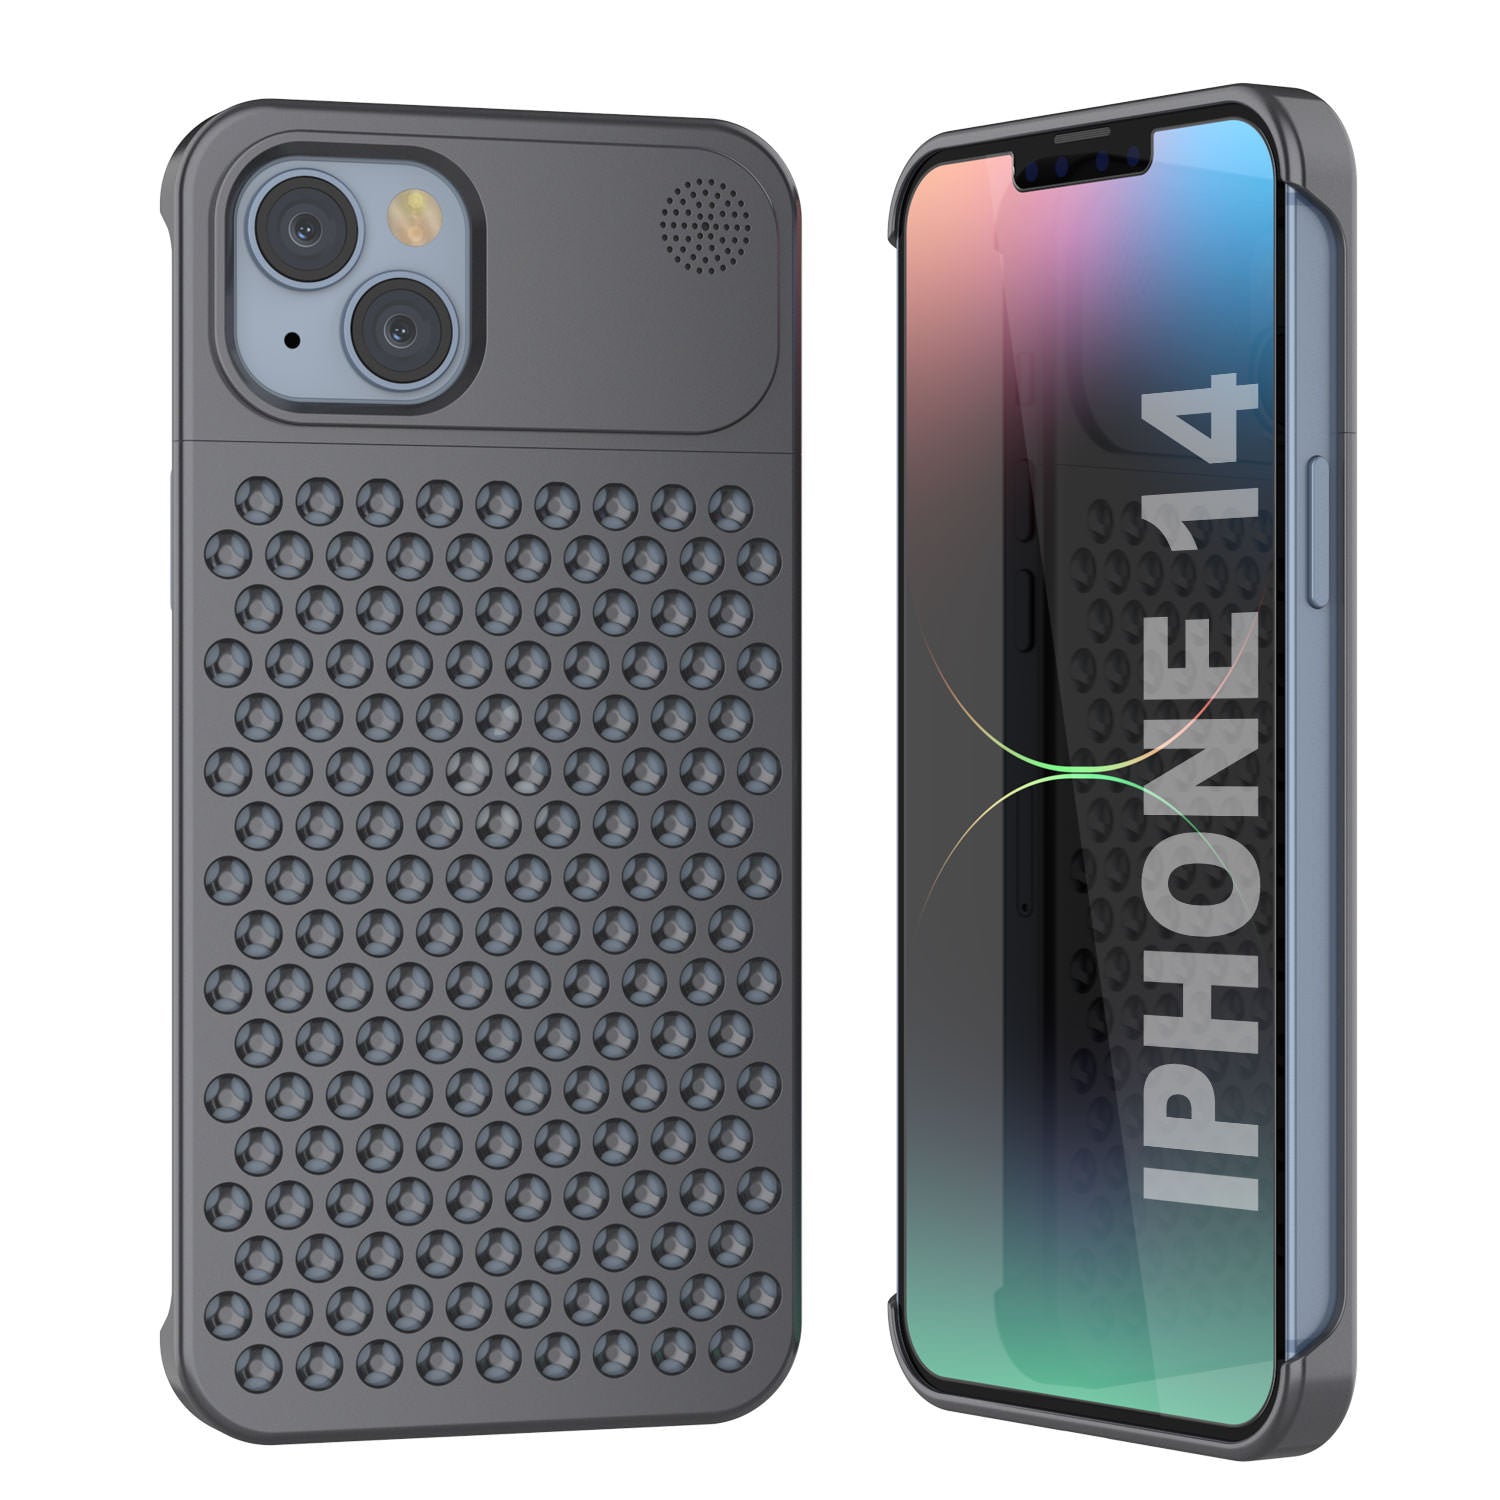 PunkCase for iPhone 14 Aluminum Alloy Case [Fortifier Extreme Series] Ultra Durable Cover [Grey]